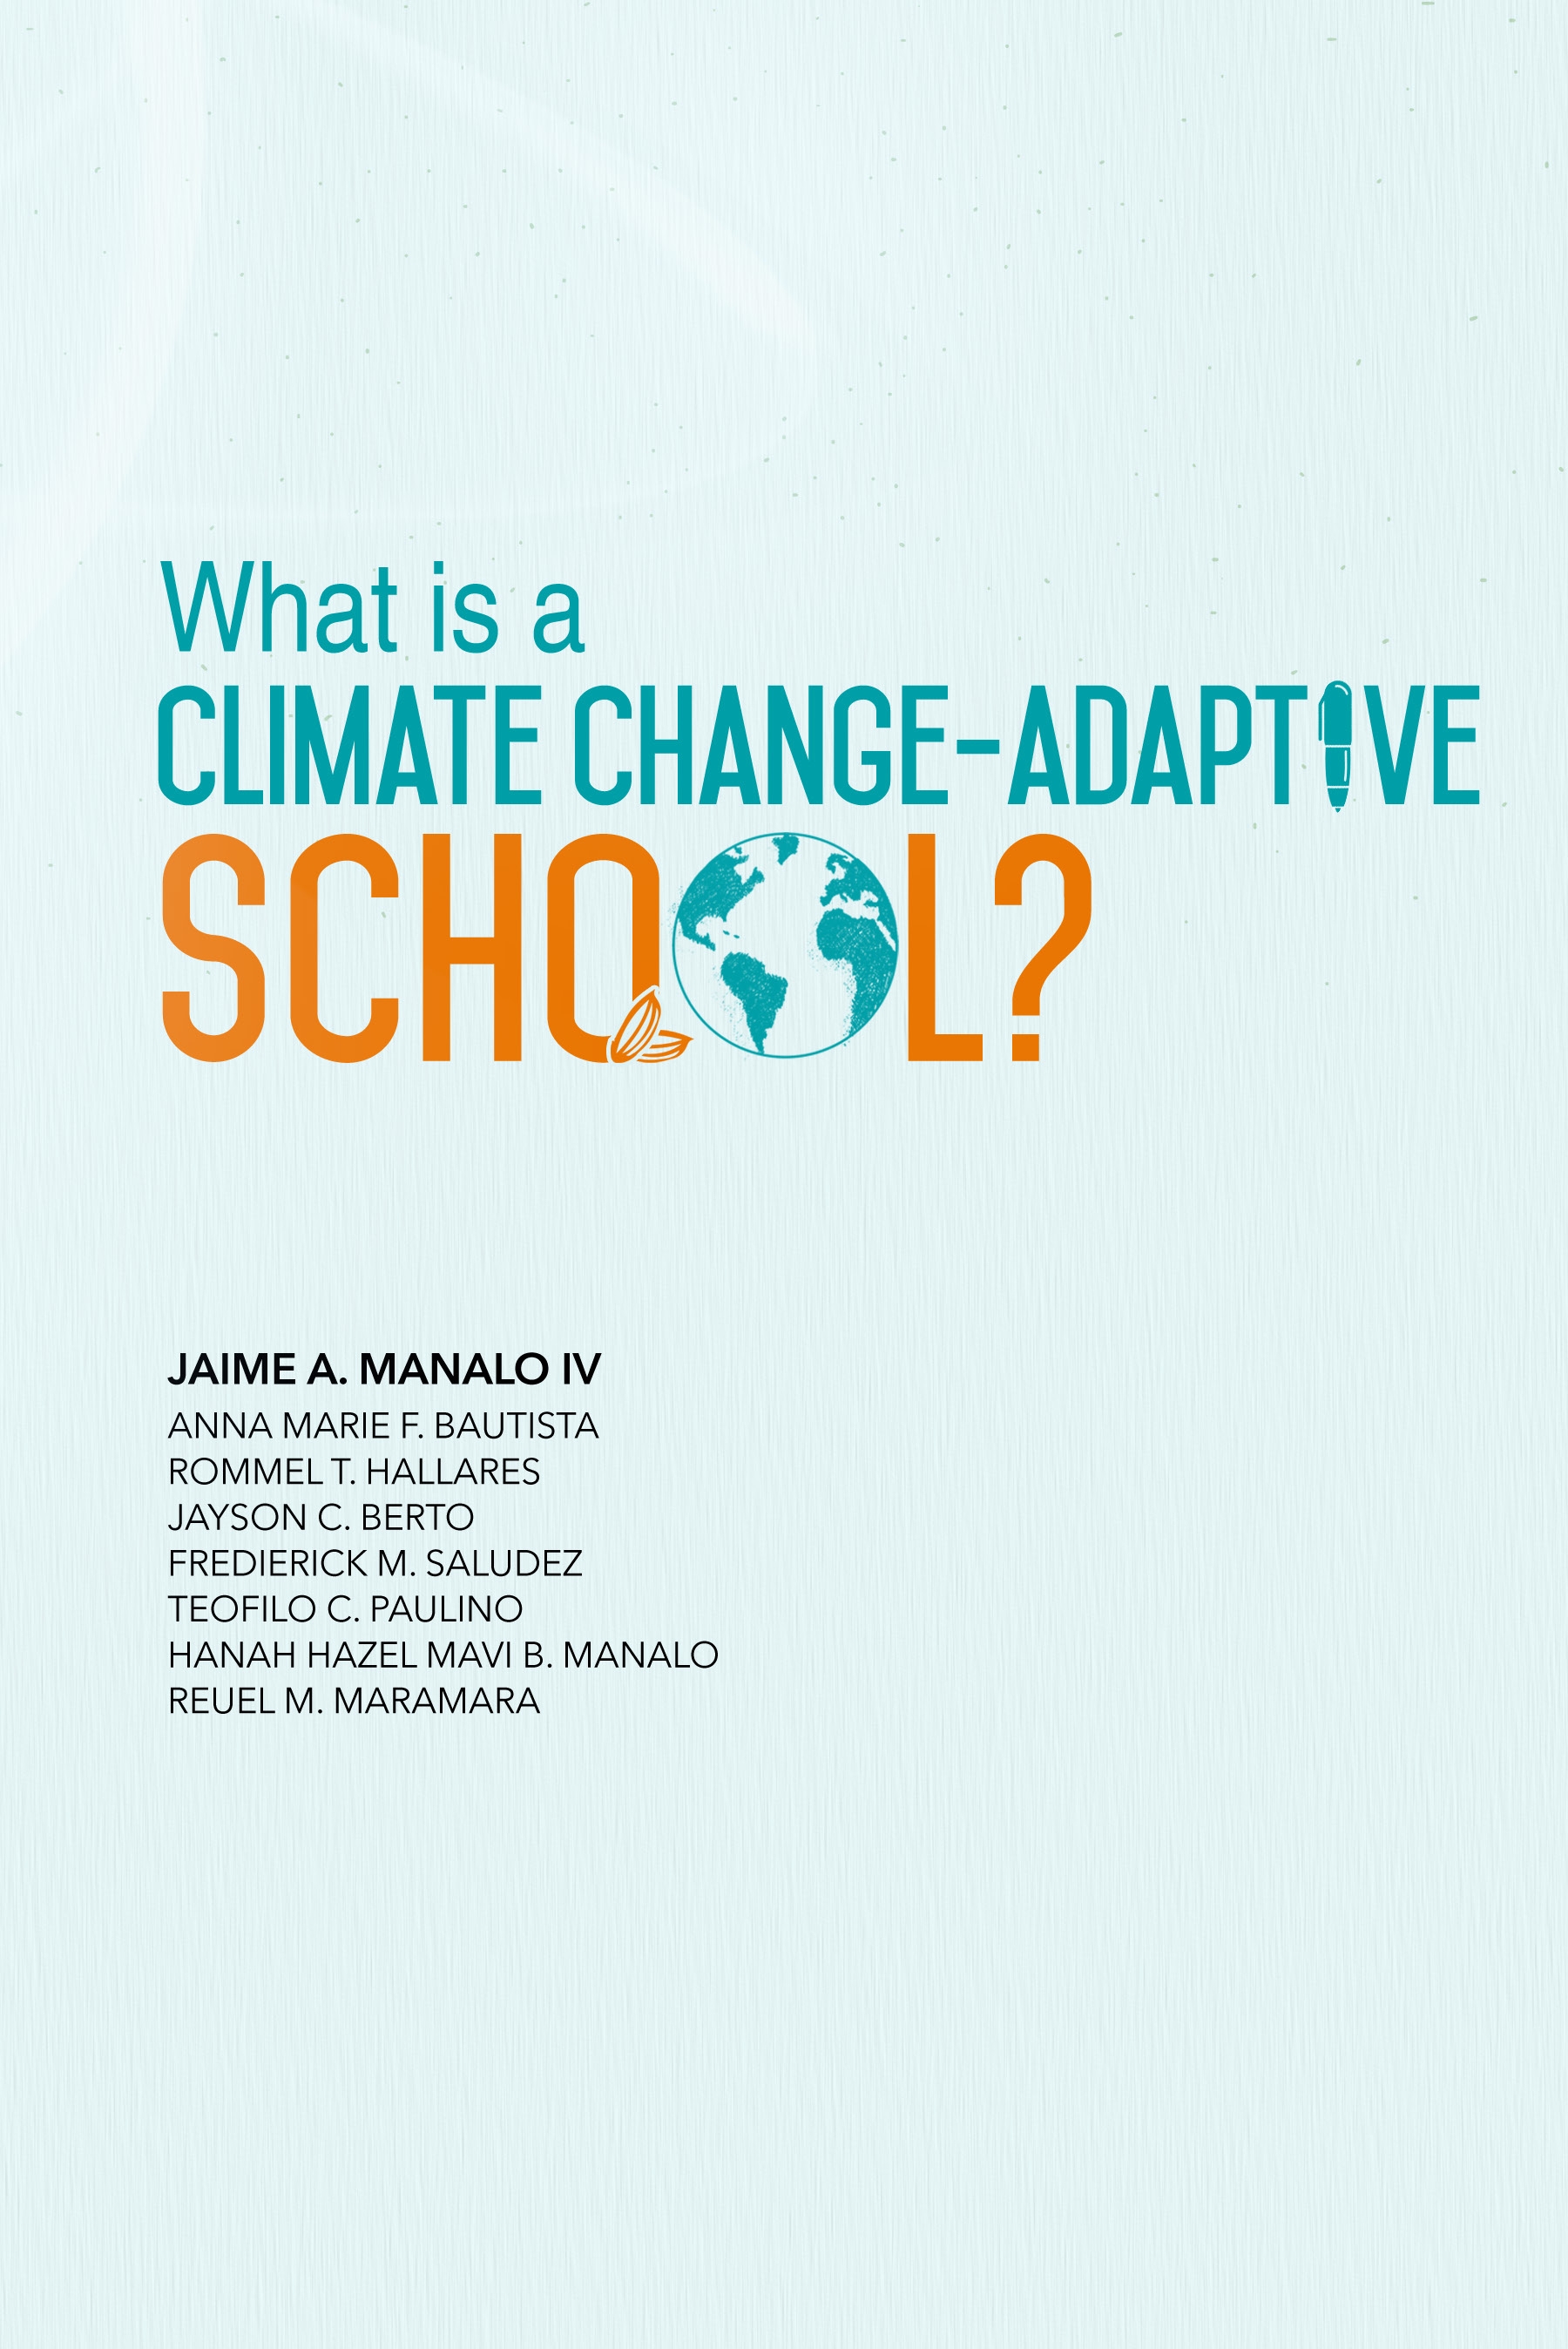 What is a Climate Change-Adaptive School?